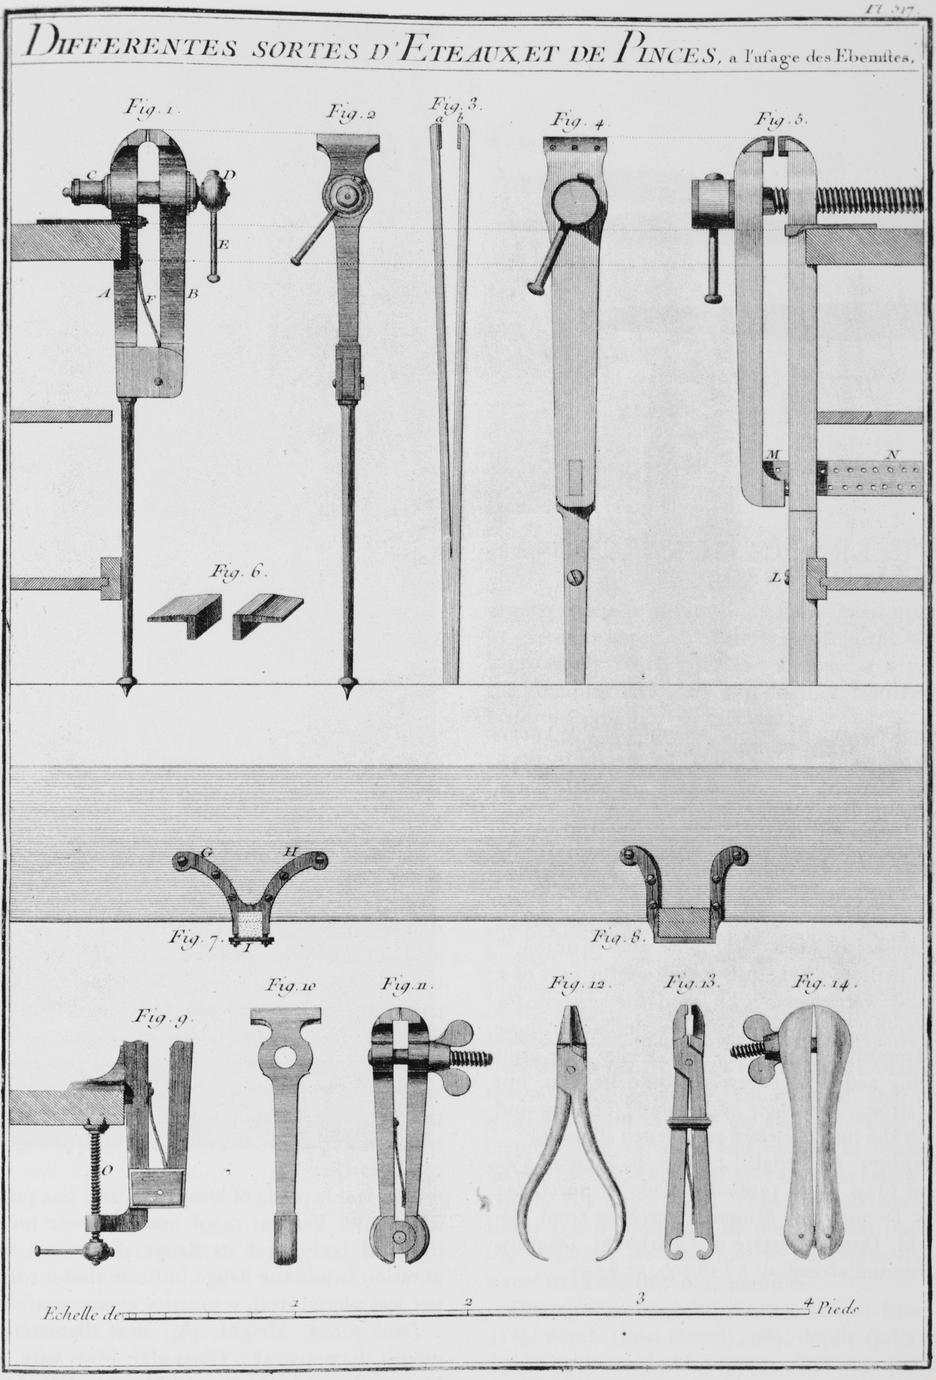 Black and white illustration of various vises and pliers or nippers used by cabinetmakers.